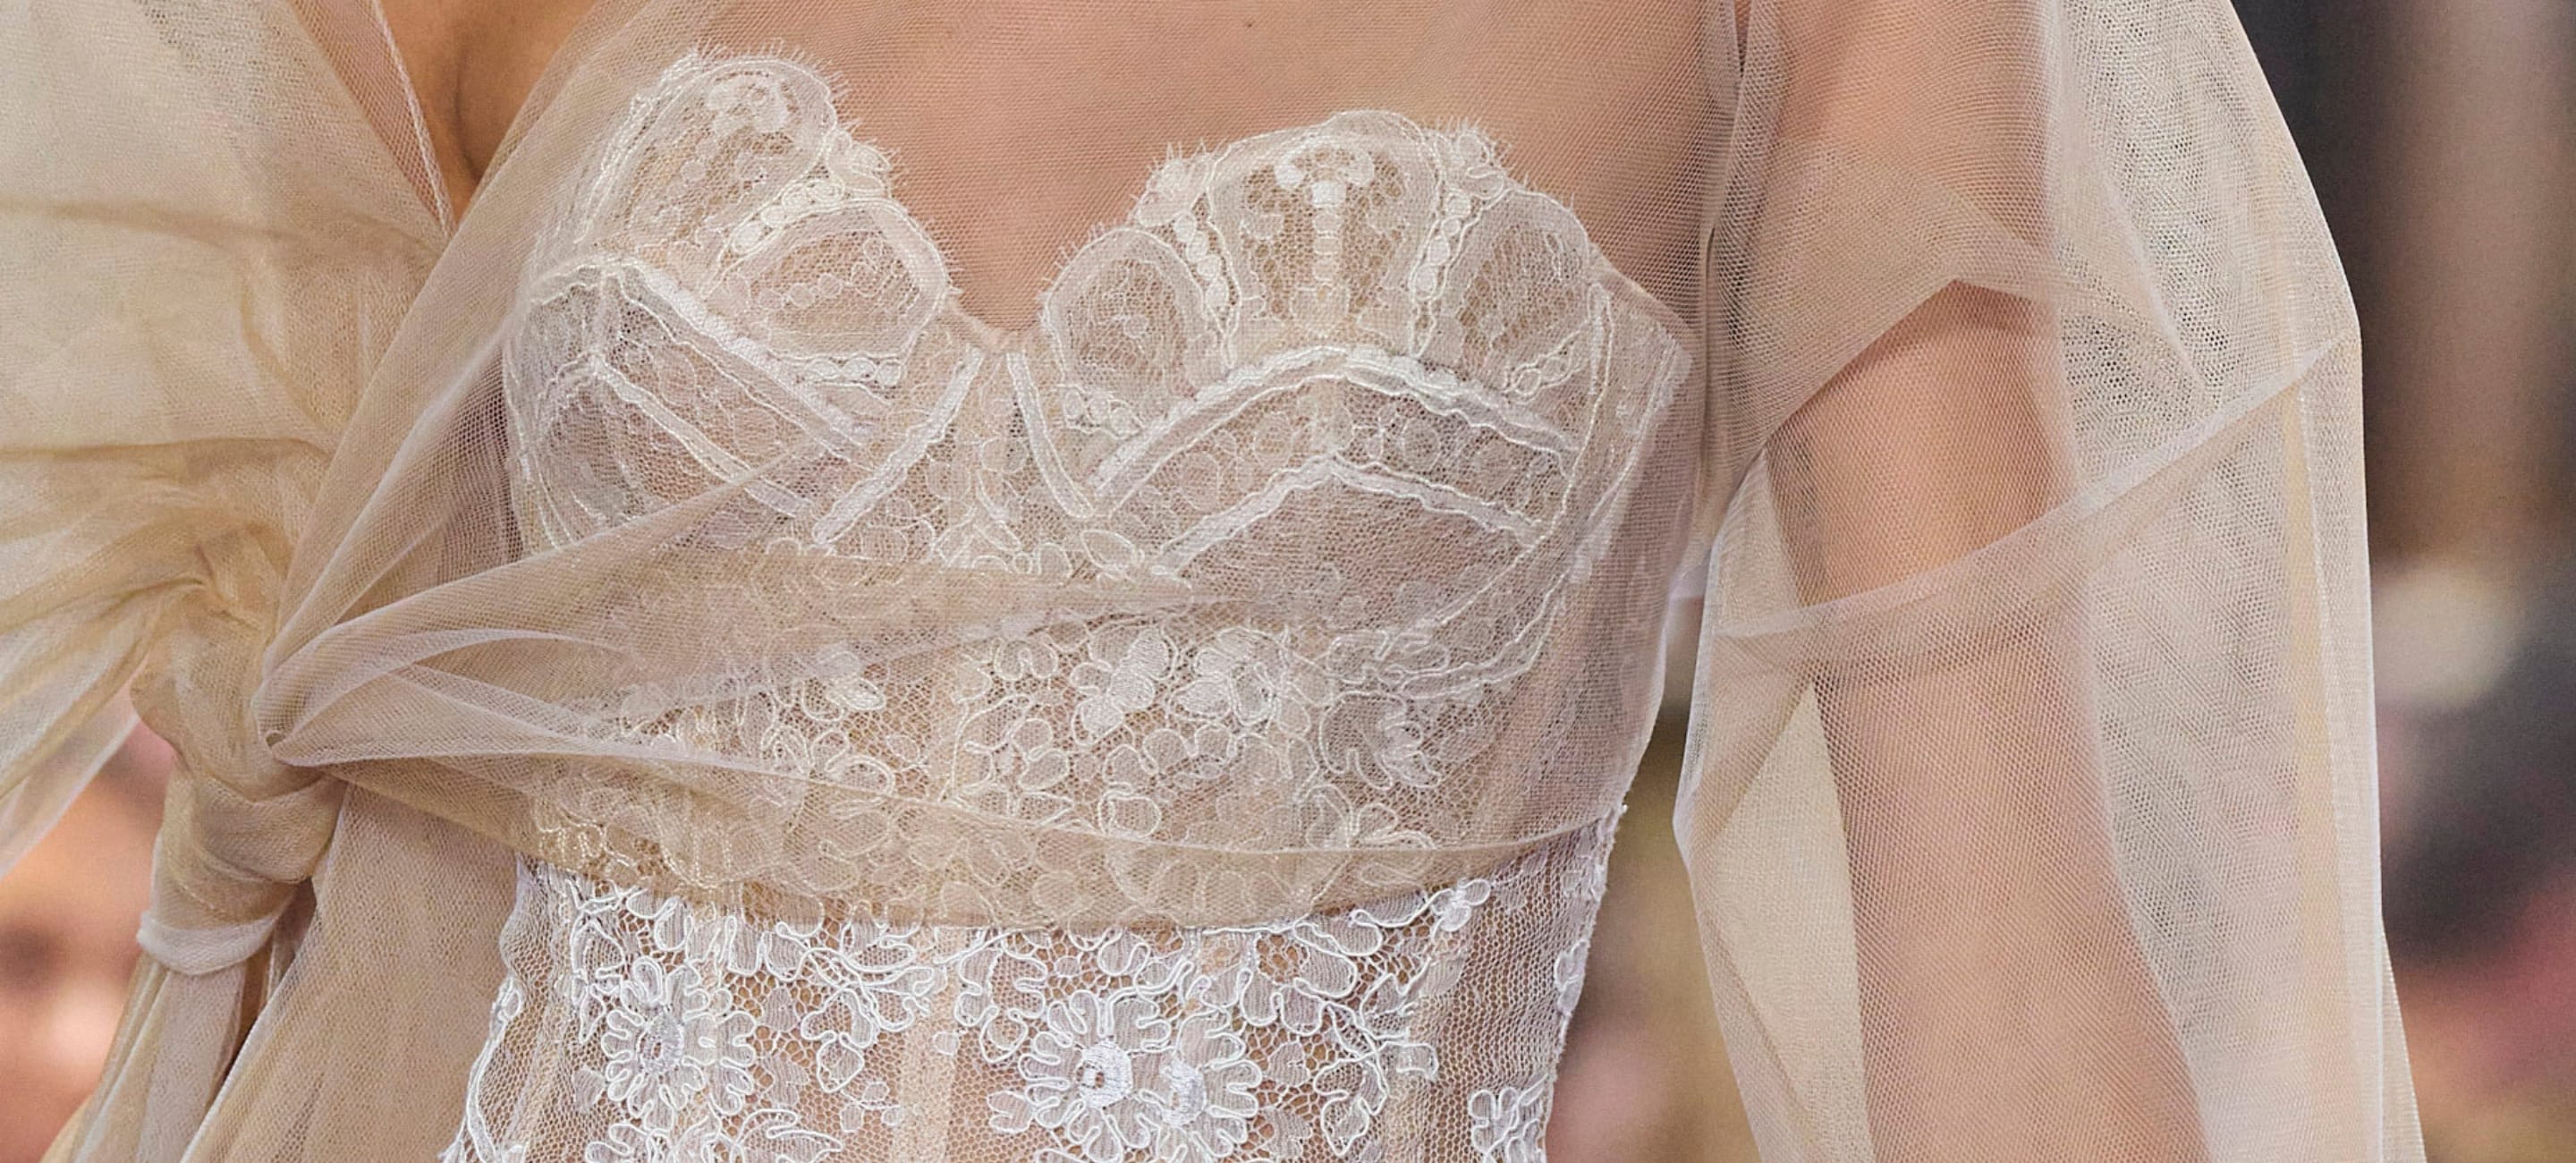 Designers get intimate with high-fashion lingerie